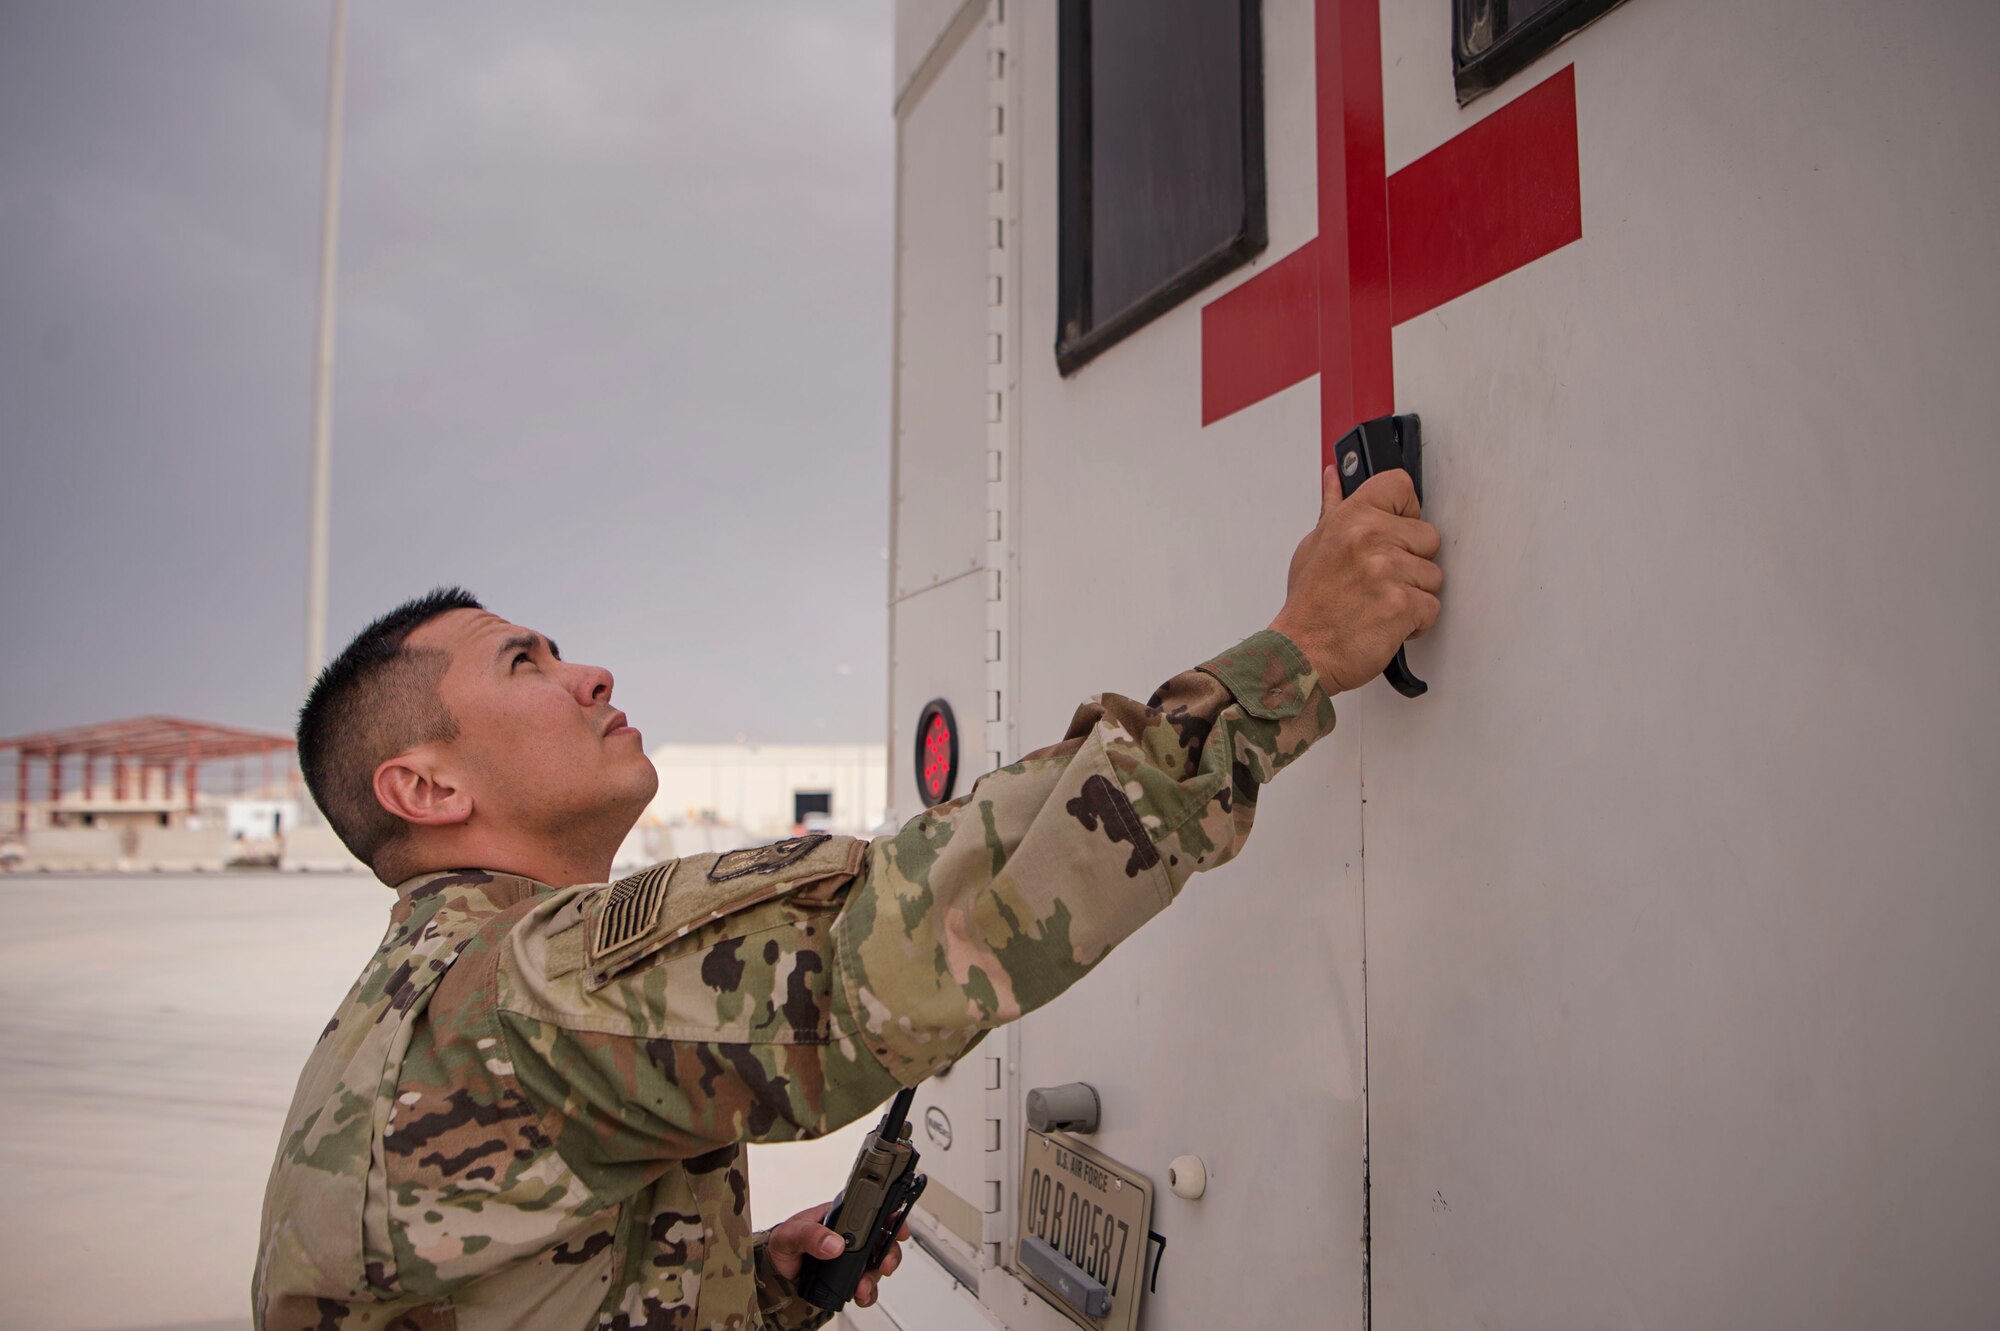 Staff Sgt. Daniel Sarsona, 379th Expeditionary Medical Support Squadron (EMDSS) En Route Patient Staging (ERPS) Facility referral management NCO in charge, finishes loading in-transit patients’ luggage on a bus Feb. 27, 2019, at Al Udeid Air Base, Qatar. Airmen at the 379th EMDSS’s ERPS facility work at both the clinic and on the flightline to ensure safe transport and care is provided to in-transit patients during their stay at Al Udeid before they are moved to locations supporting higher levels of medical treatment, if necessary. (U.S. Air Force photo by Tech. Sgt. Christopher Hubenthal)